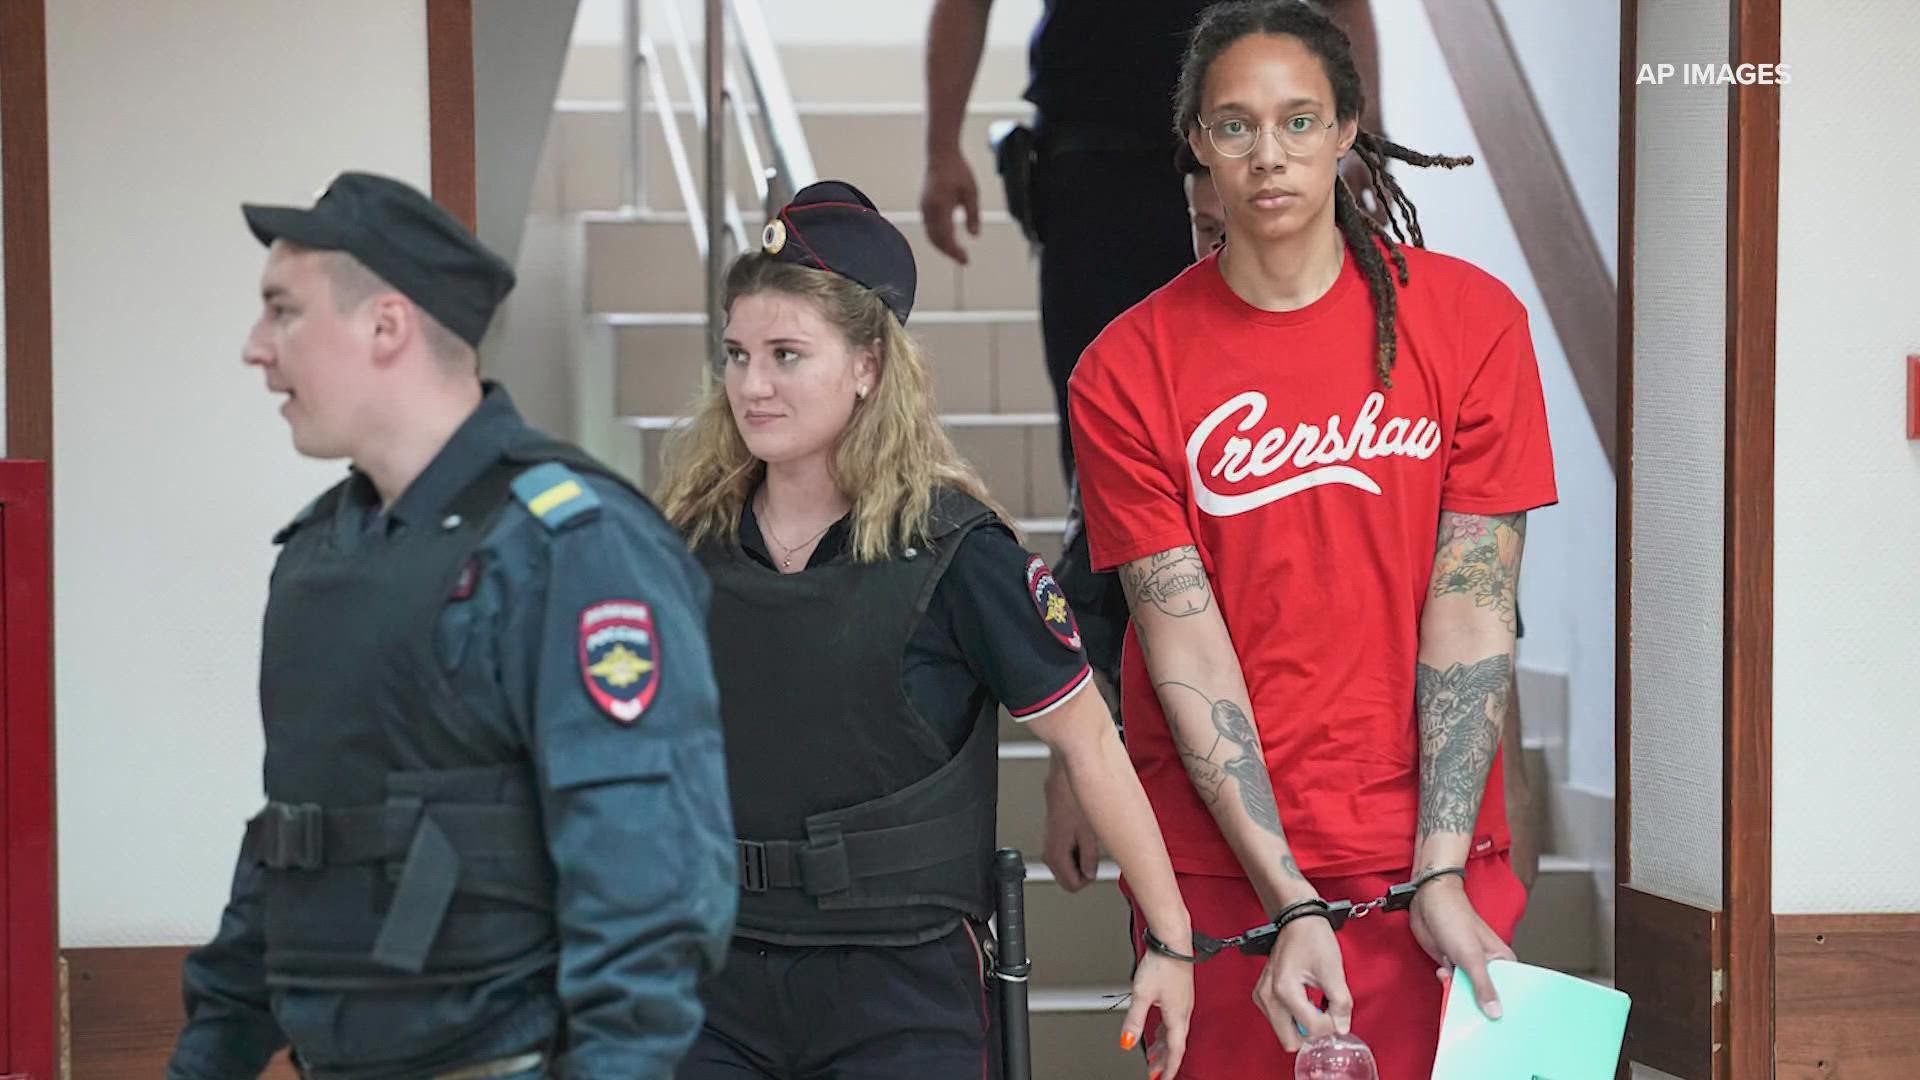 Houston native and WNBA star Brittney Griner could spend up to 10 years in a Russian prison after pleading guilty to drug charges.